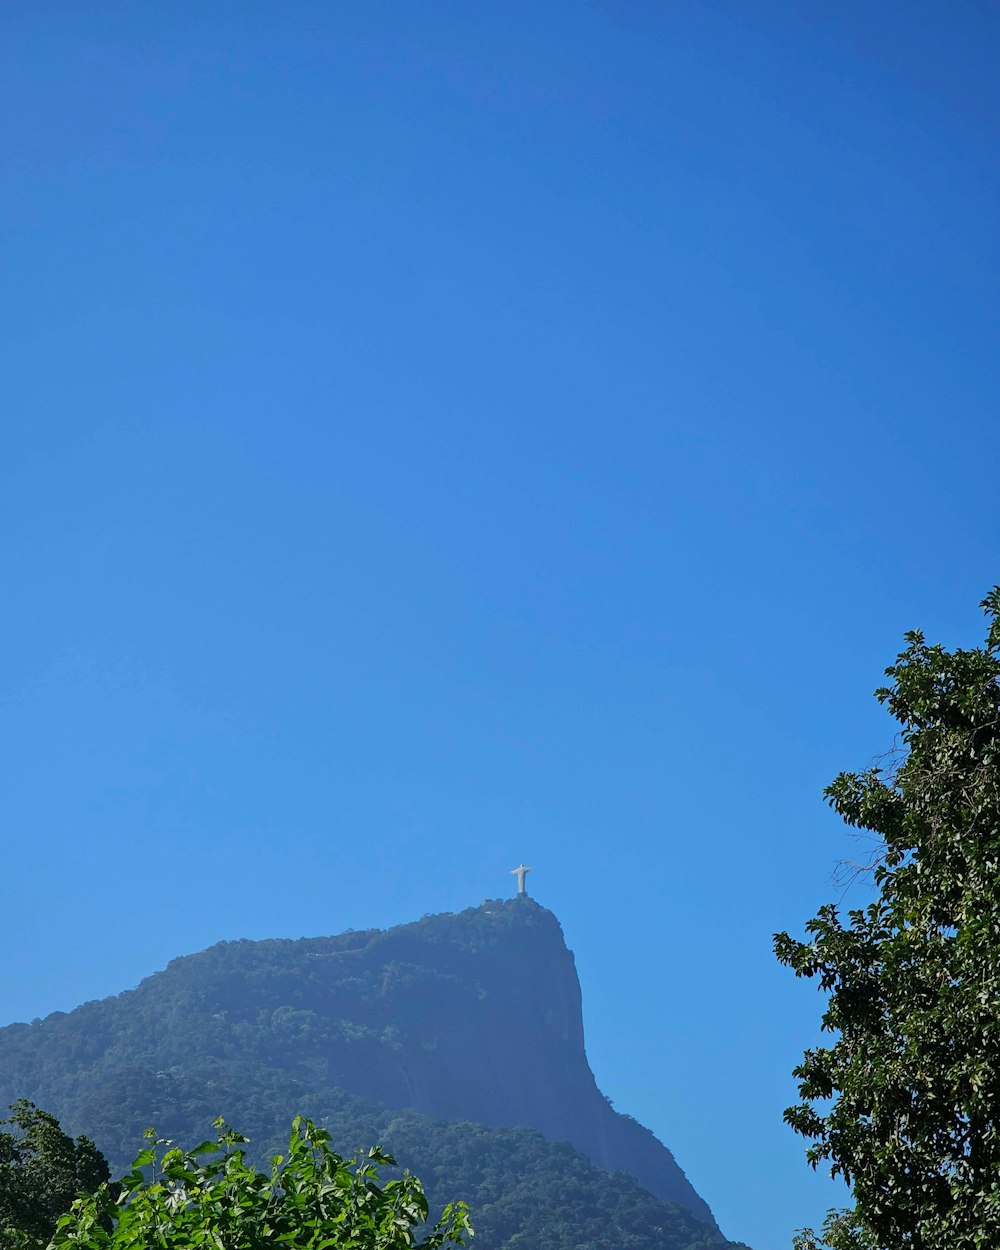 a tall mountain with a cross on top of it